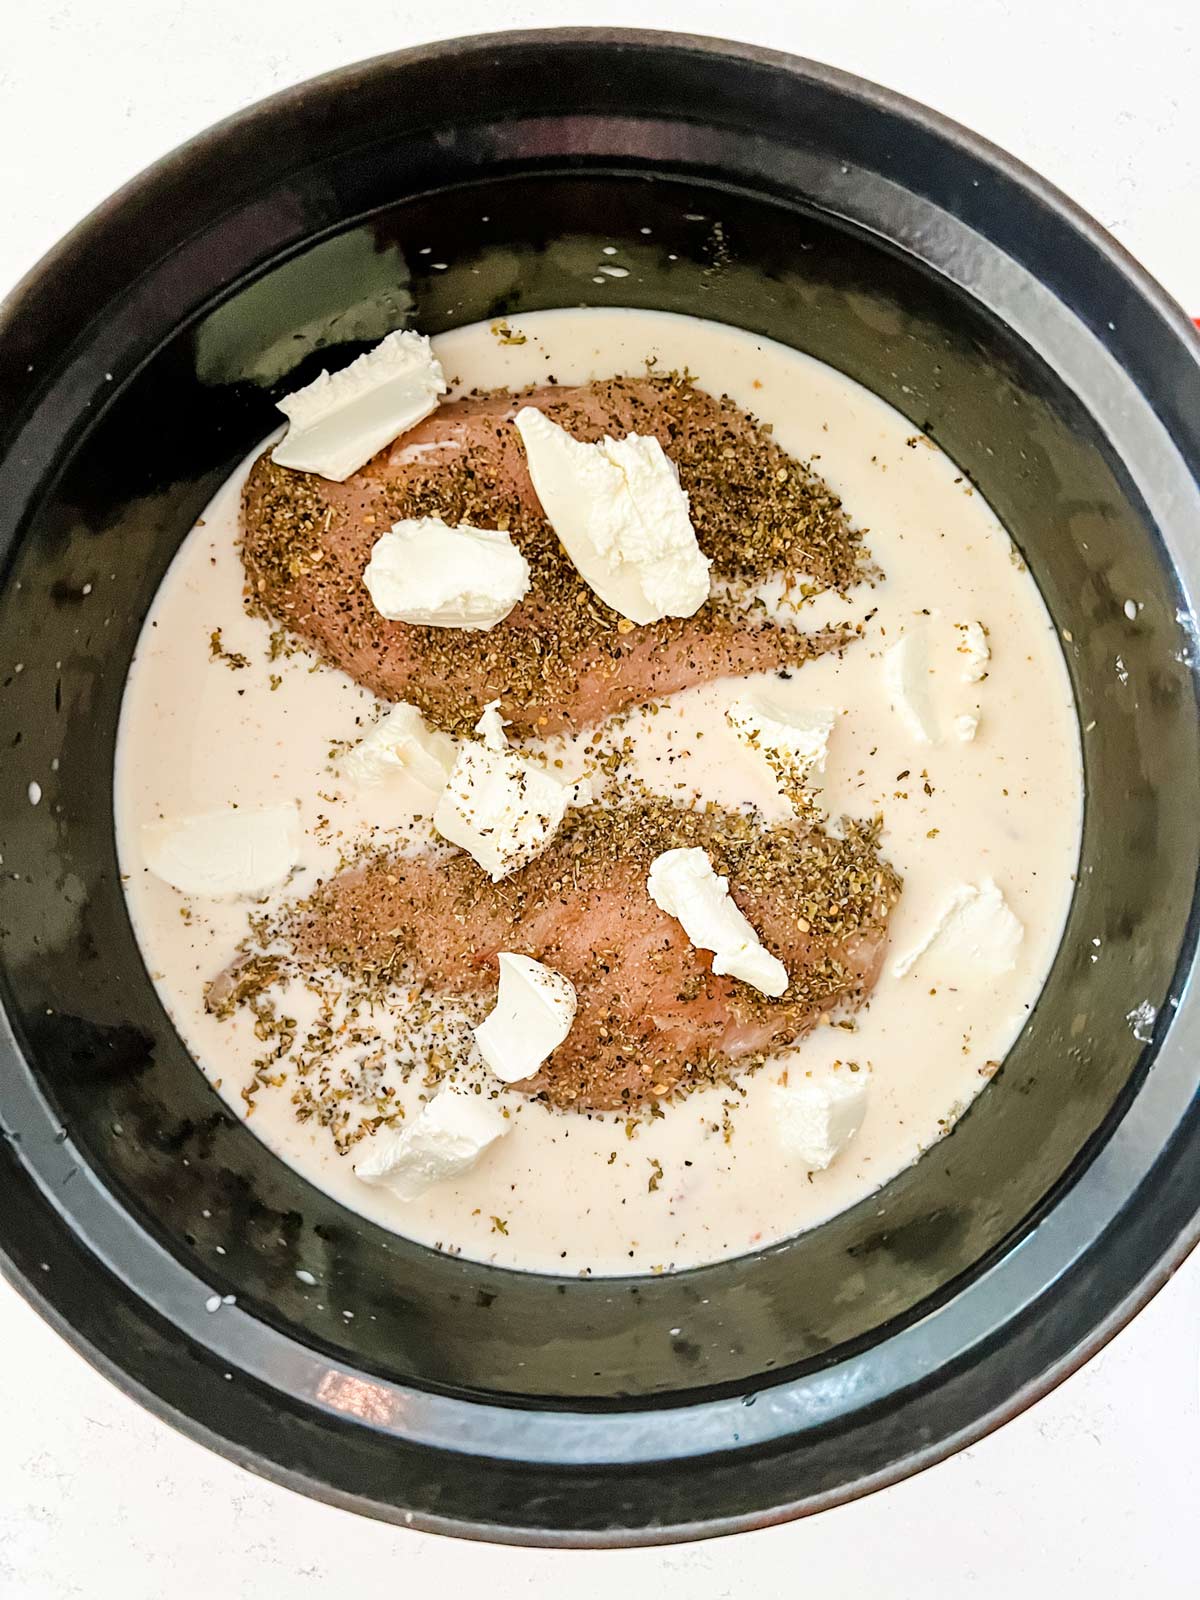 Cream cheese on top of chicken and a cream sauce in a slow cooker.